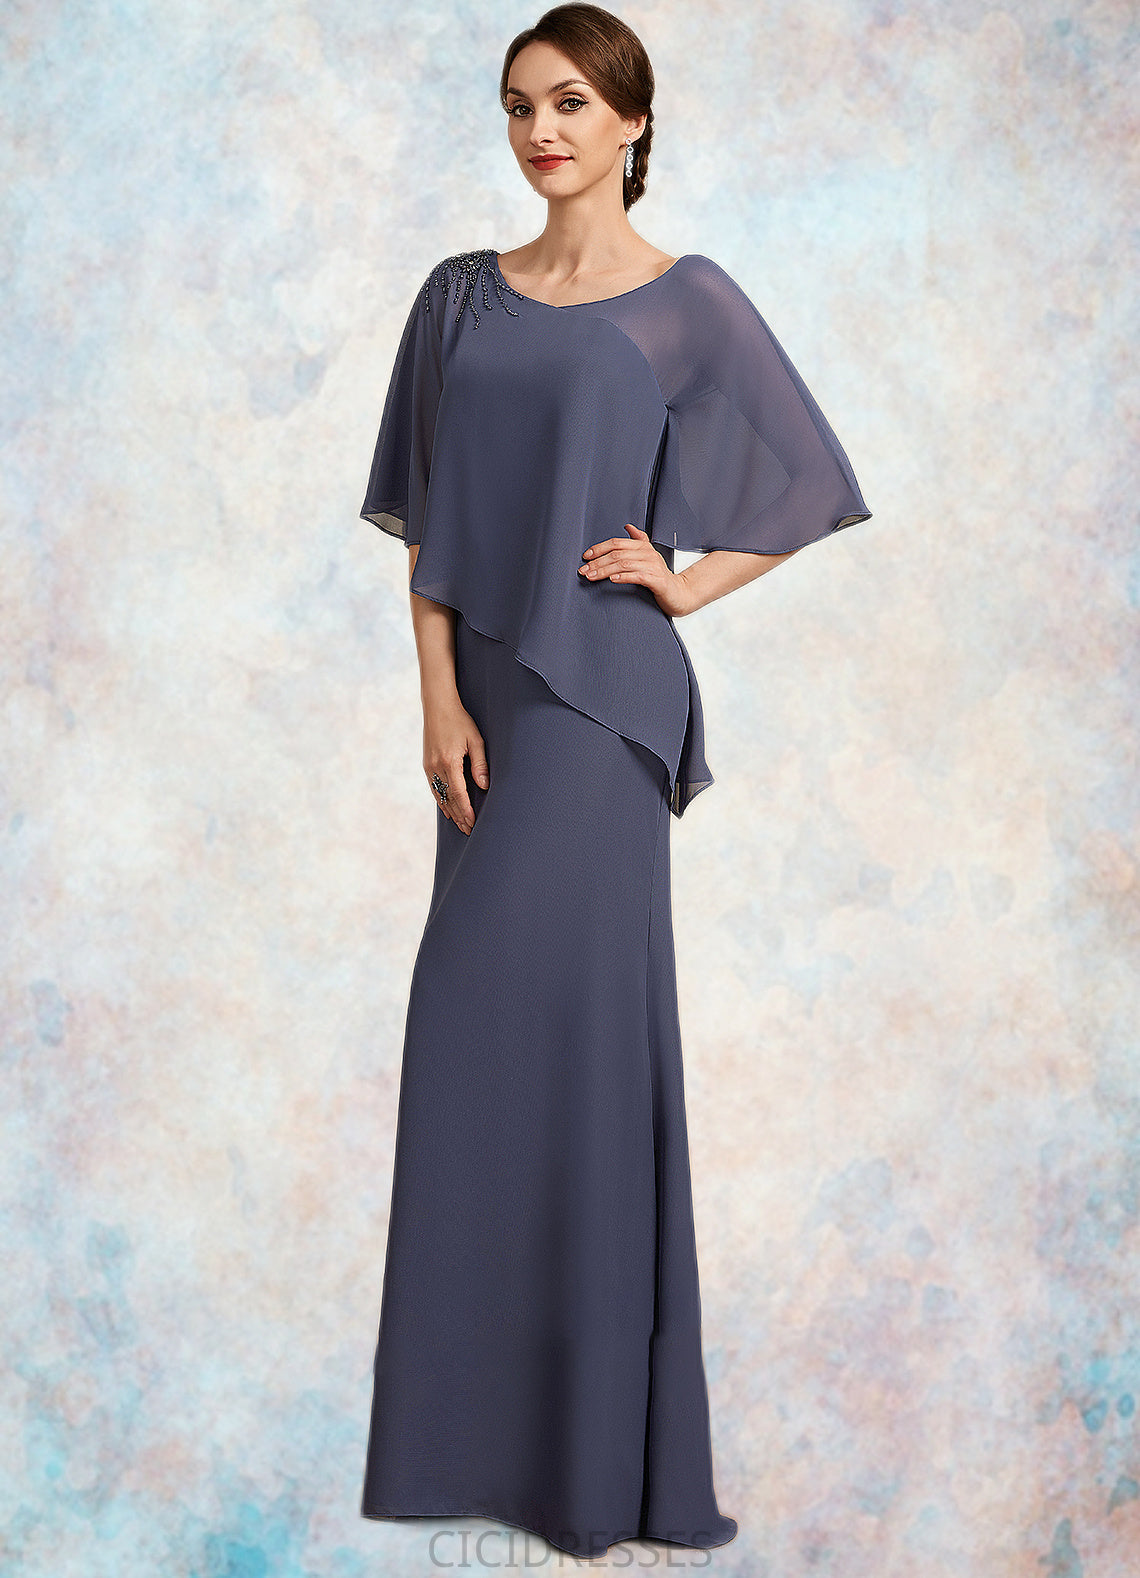 Abbie A-Line Scoop Neck Floor-Length Chiffon Mother of the Bride Dress With Beading CIC8126P0014793